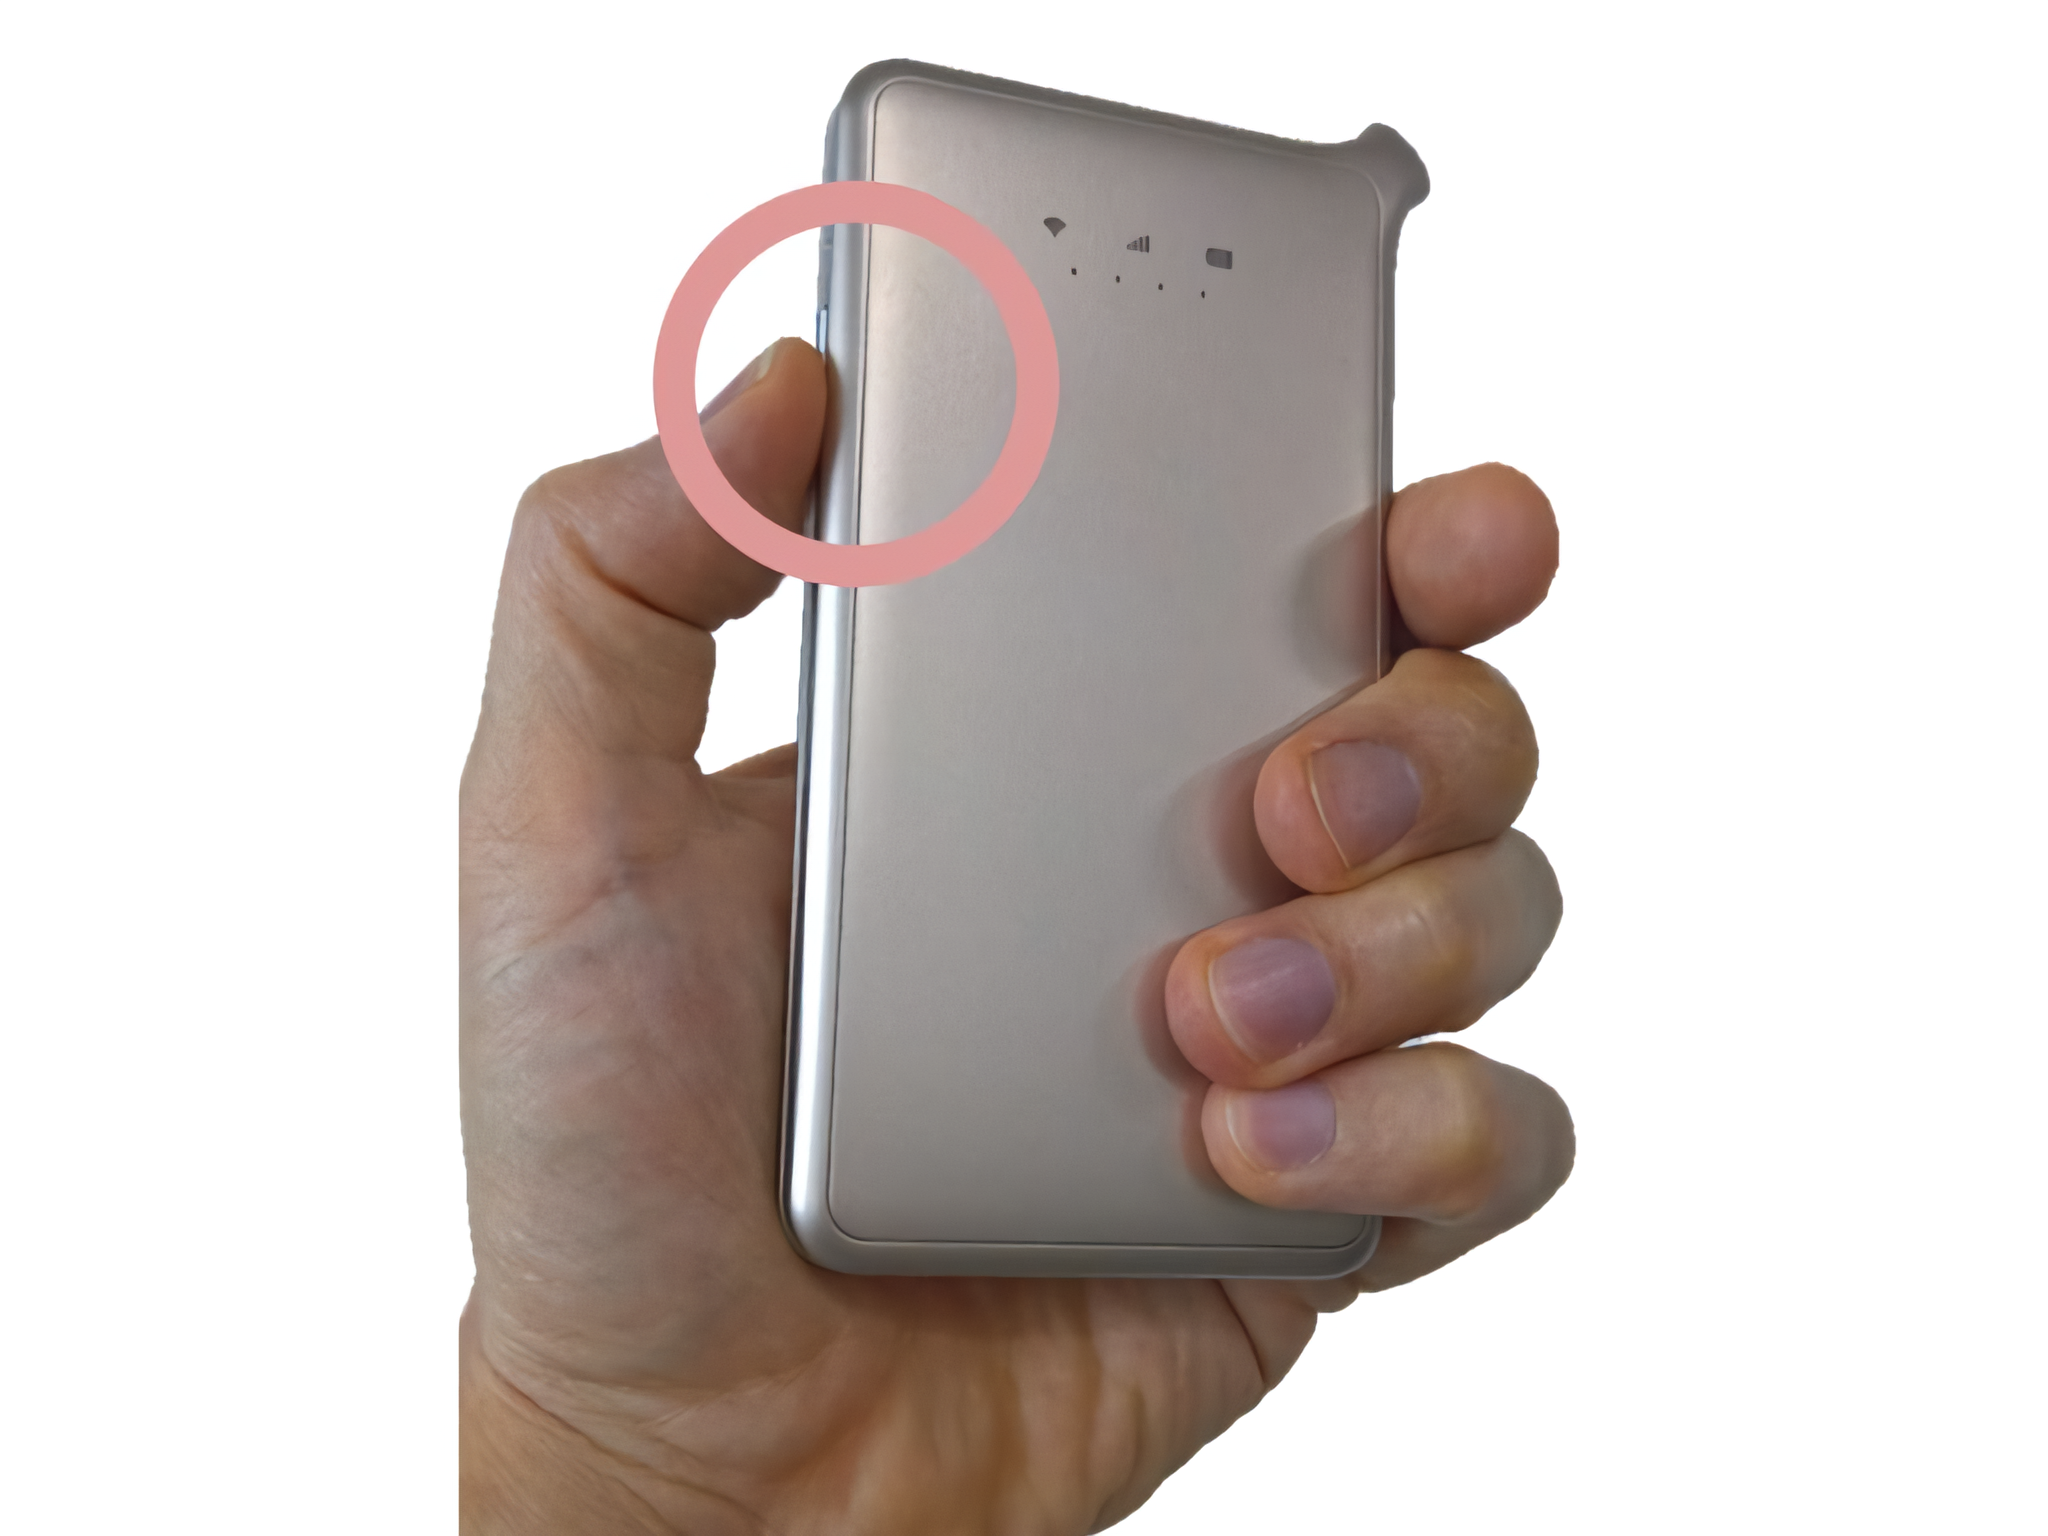 Button on side of device